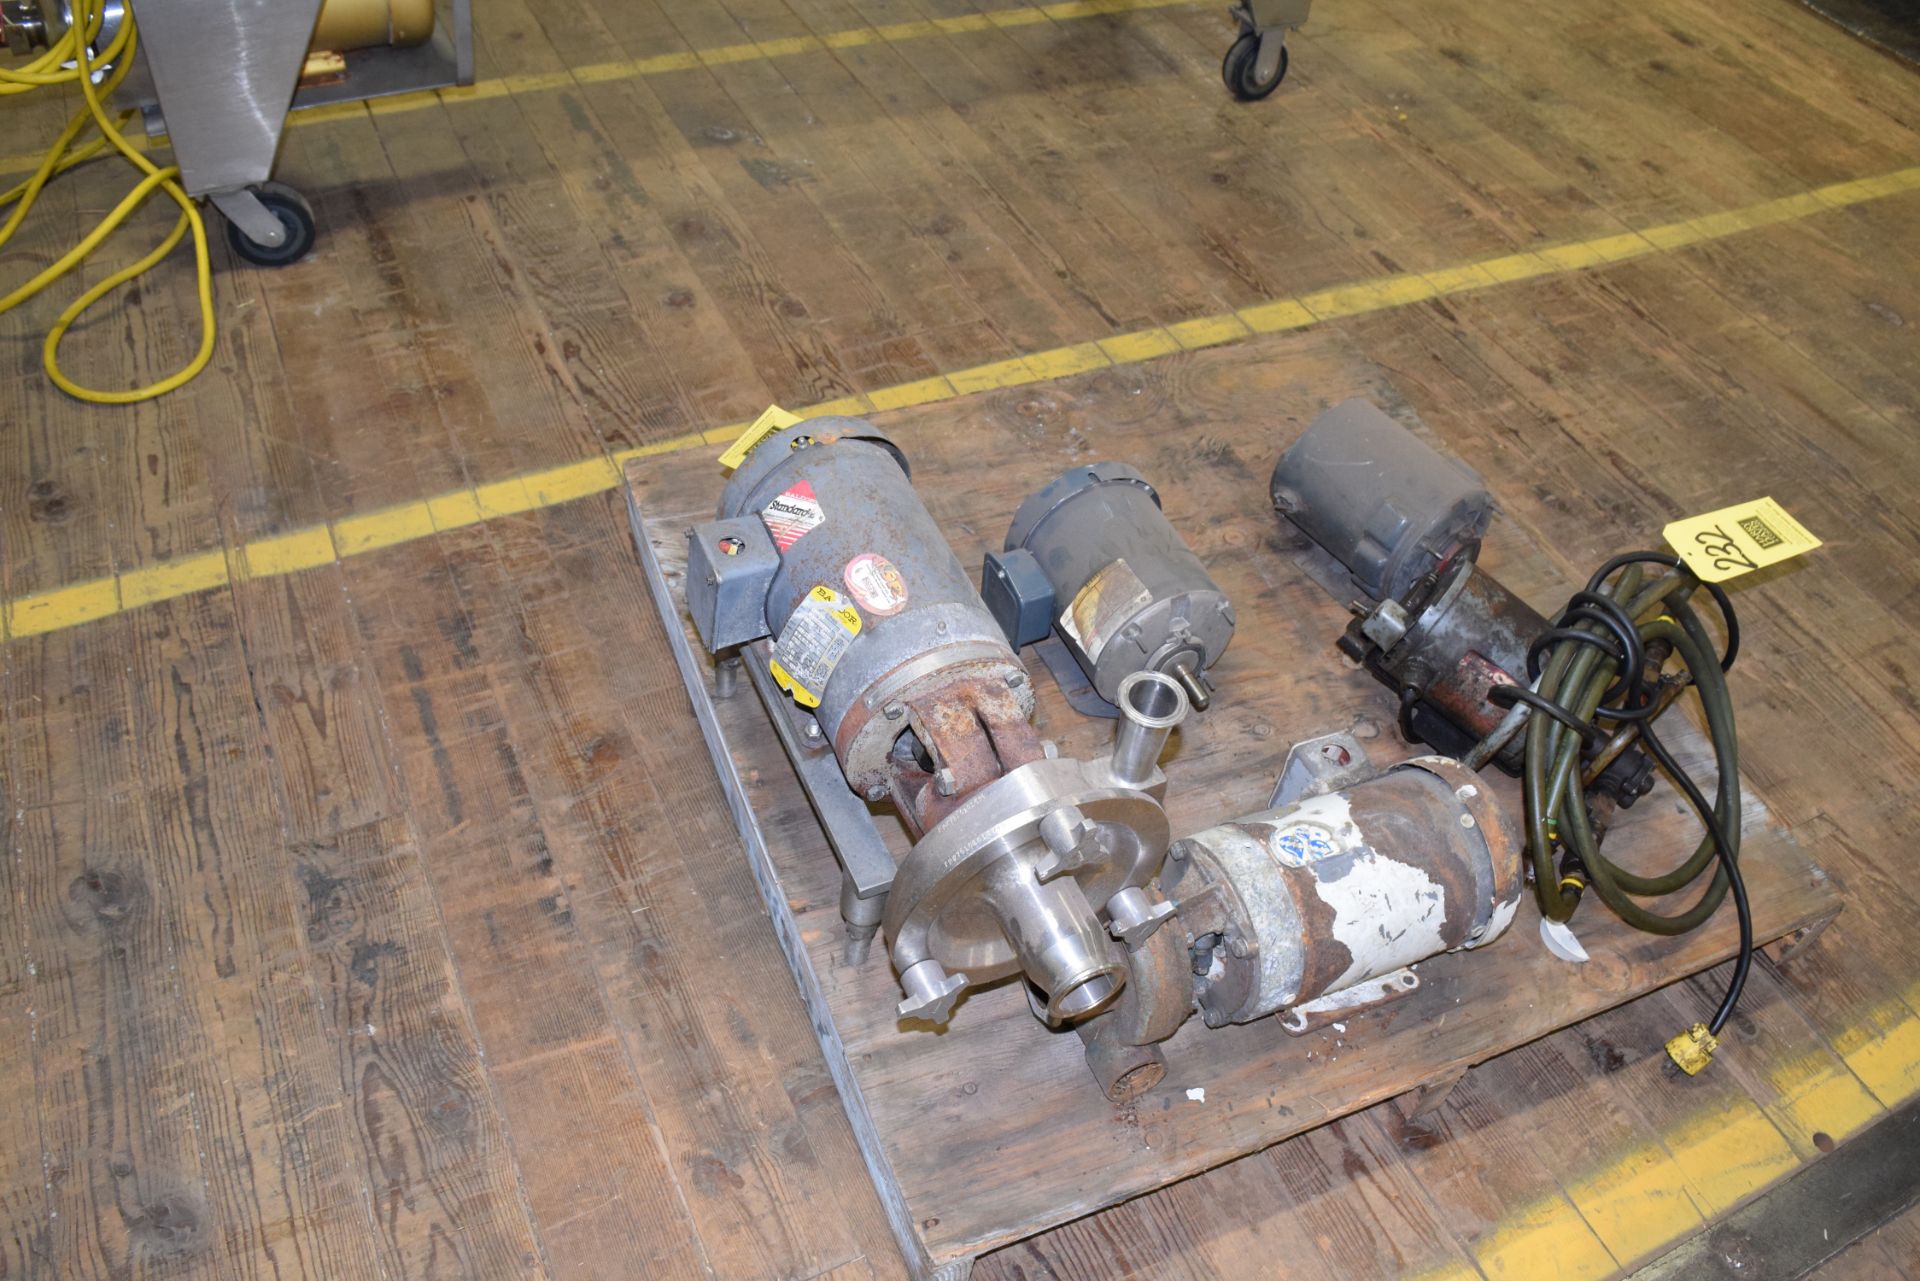 Fristam Centrifugal Pump with Baldor 2 HP 1,760 RPM Motor, 2" X 1.5" Clamp Type  **Rigging Fee $50